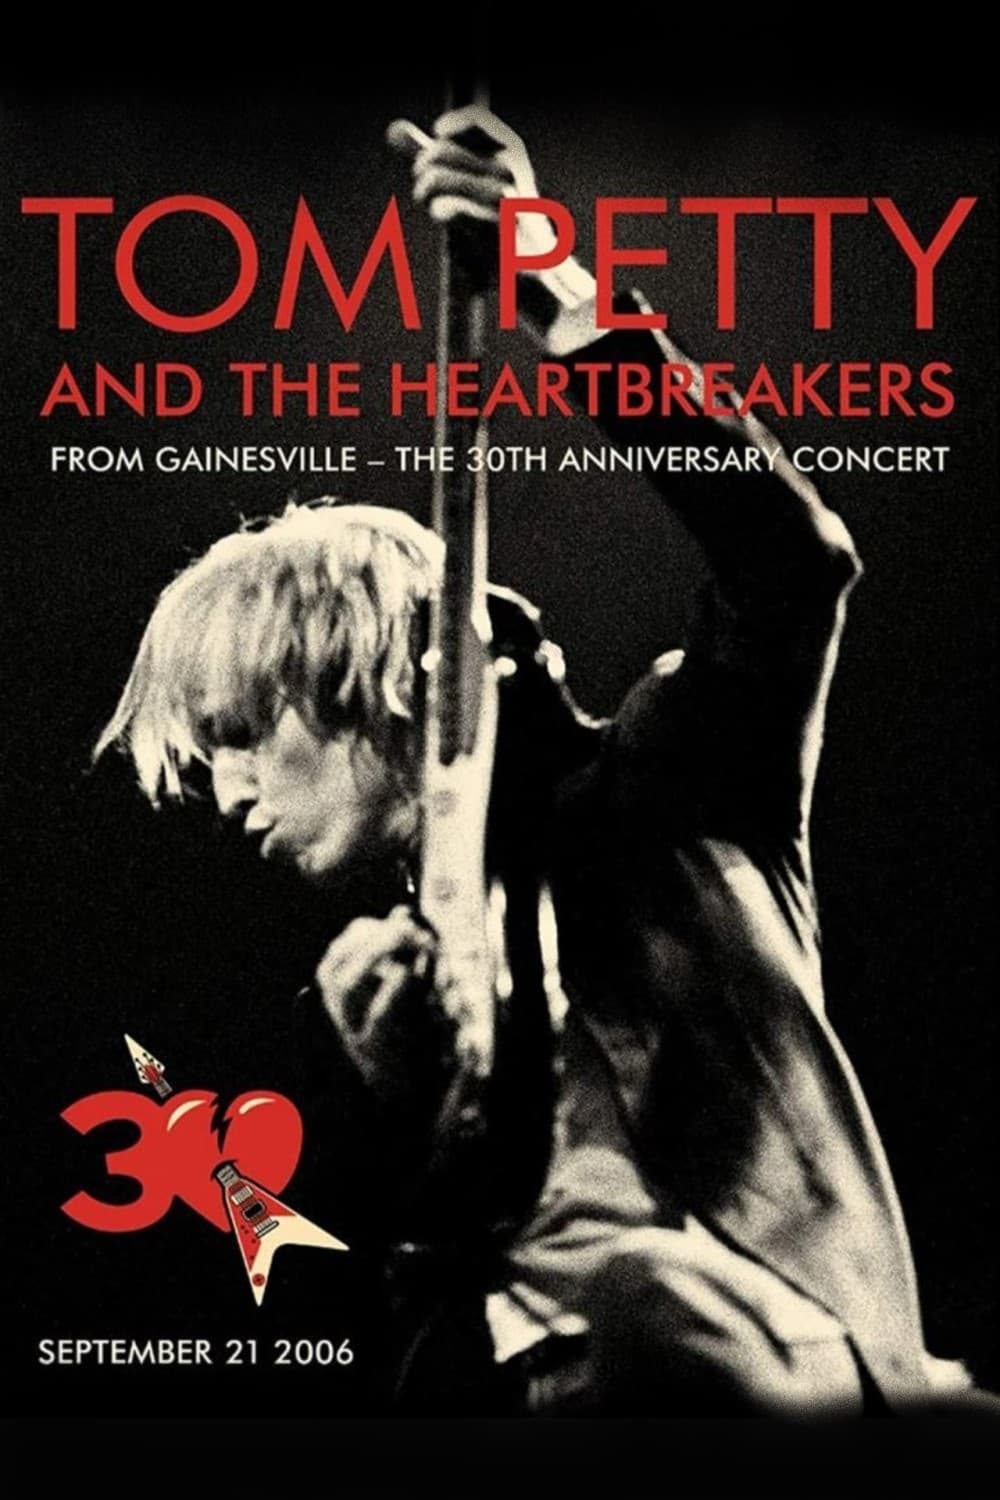 Tom Petty & The Heartbreakers From Gainesville - The 30th Anniversary Concert